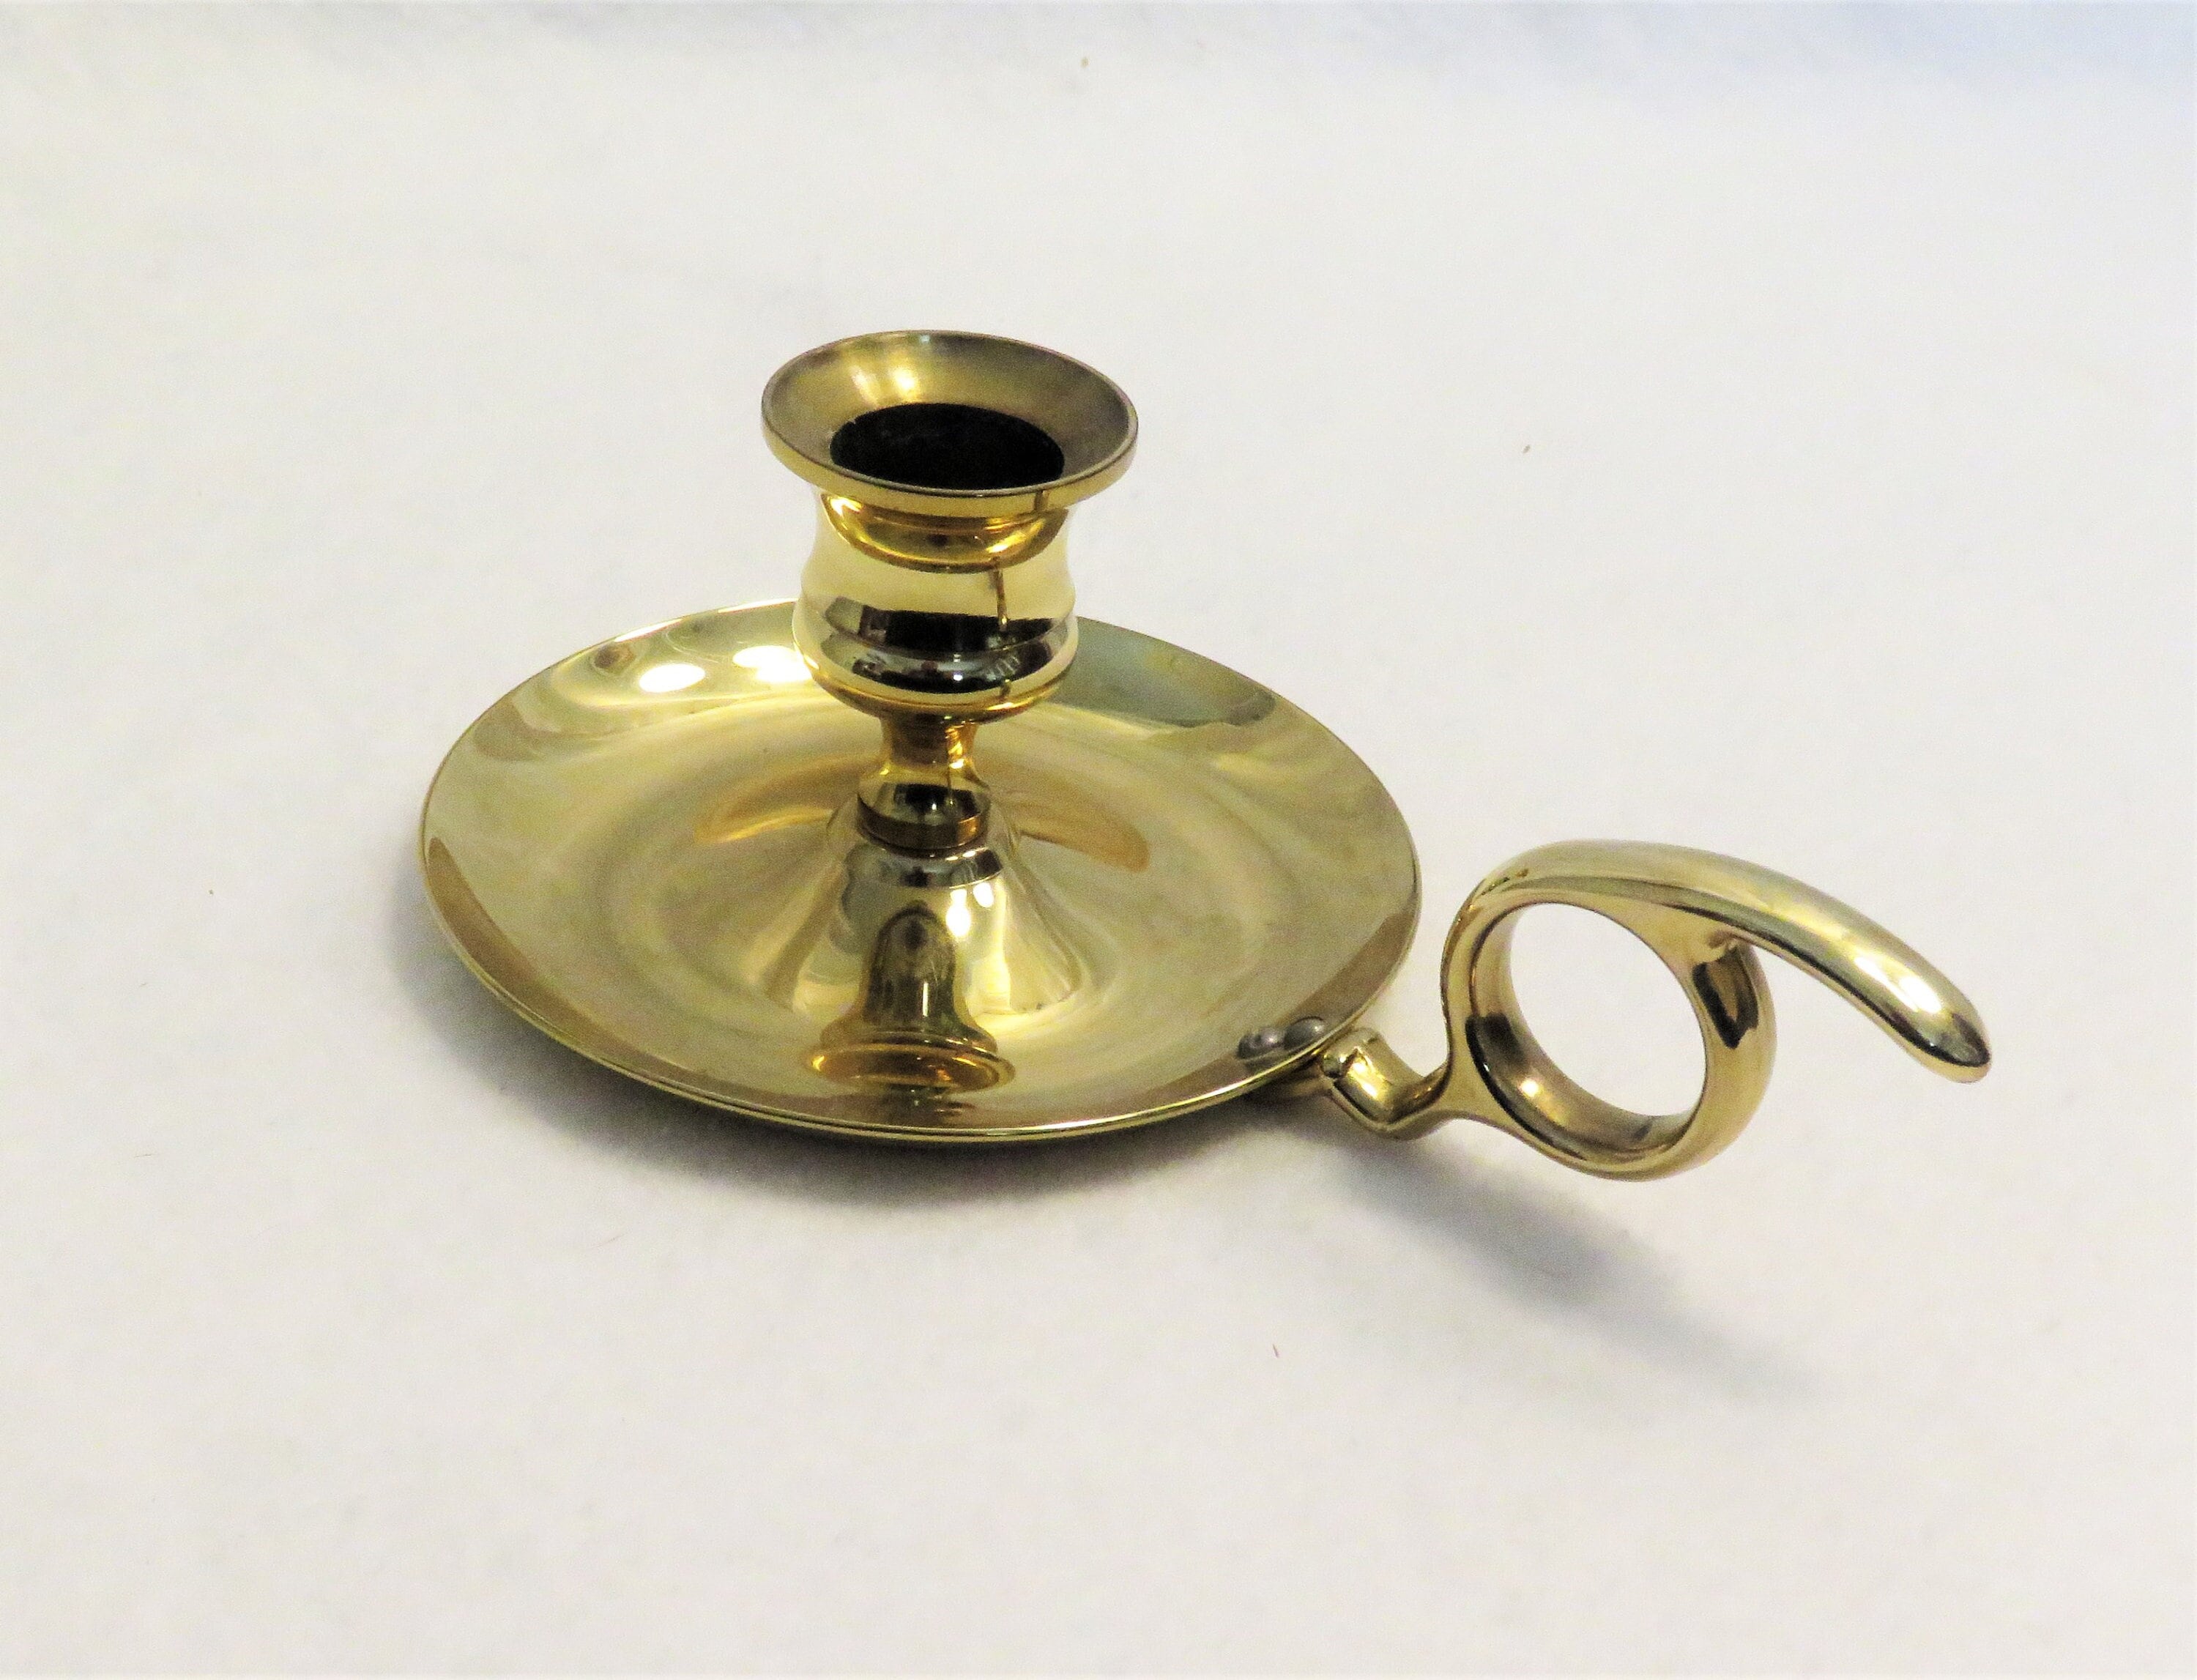 2 Piece Gold Brass Metal Chamberstick Candle Holder Fits Candles